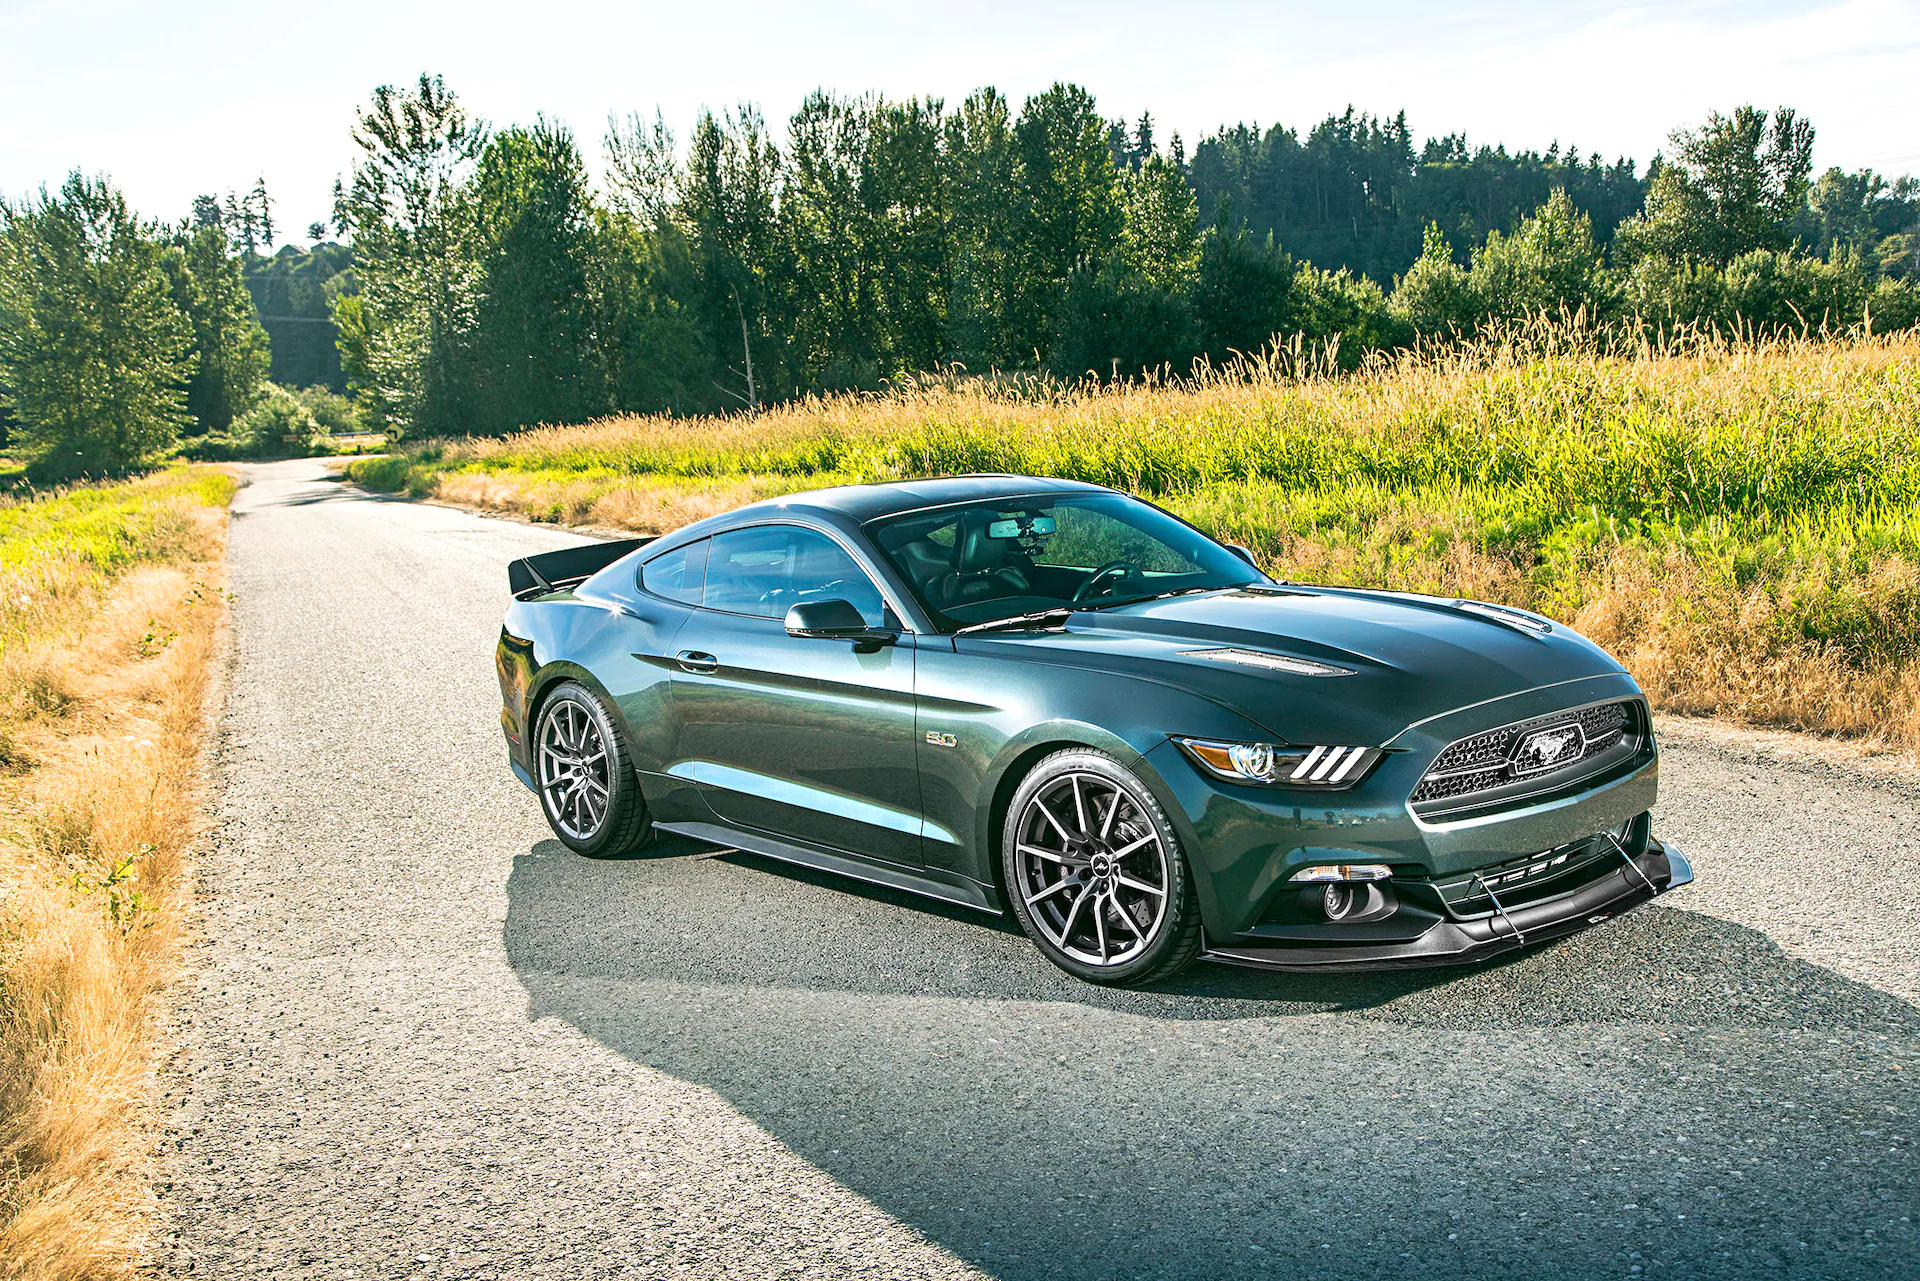 Guard 2015 Ford Mustang